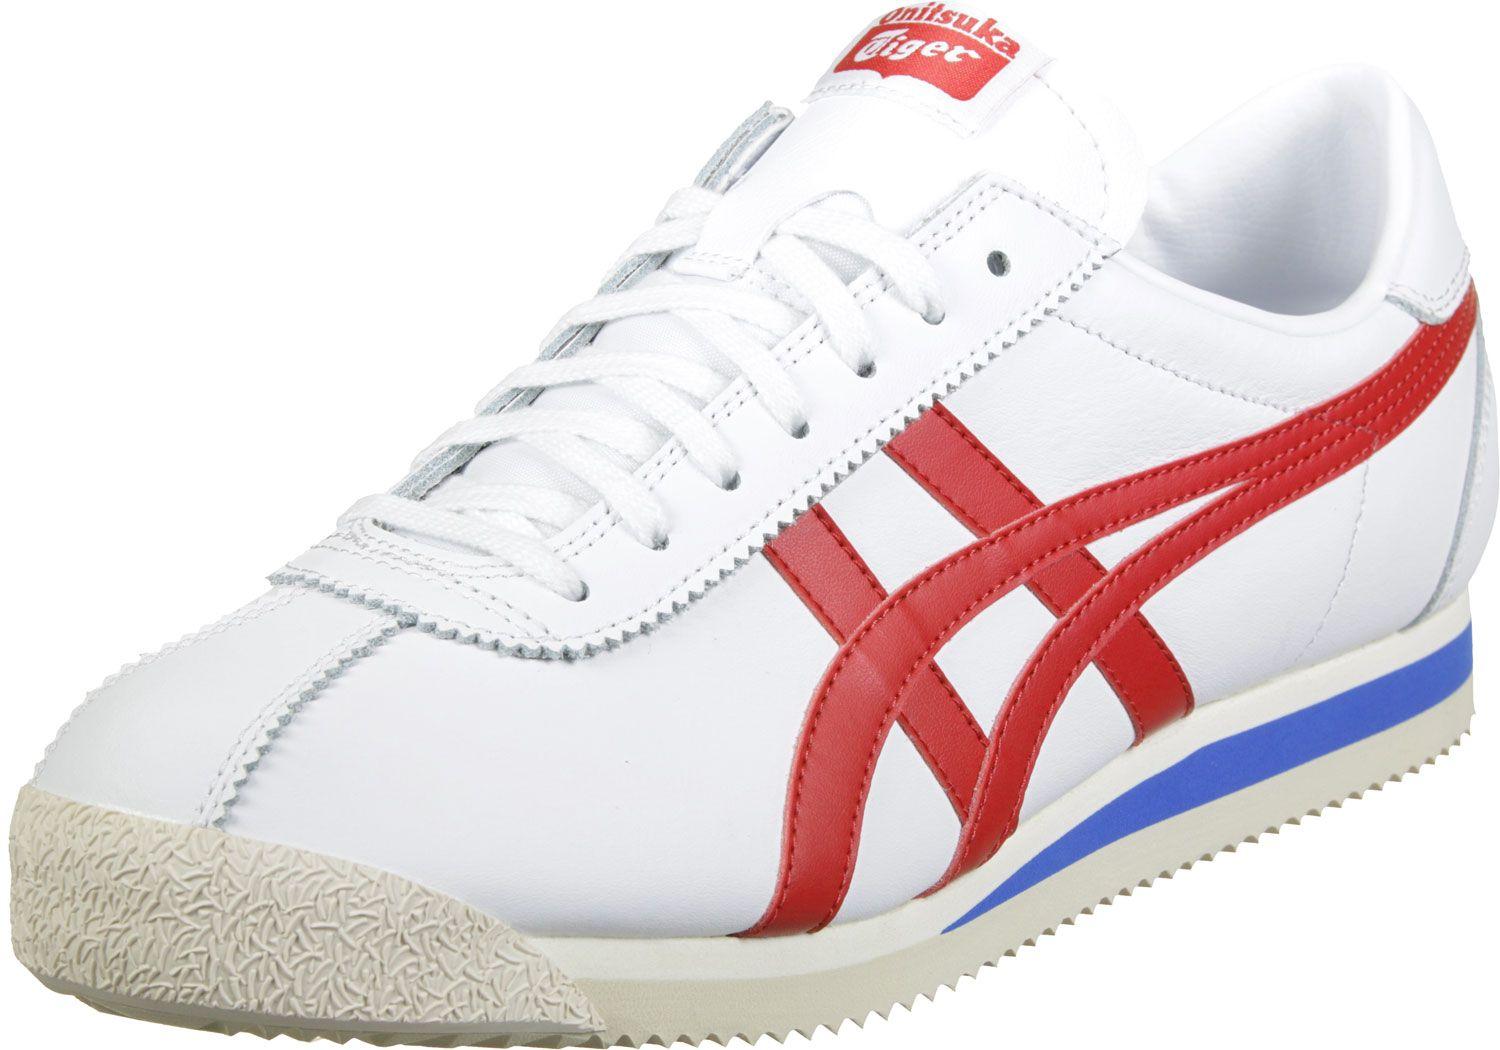 Red and Blue Tiger Logo - Onitsuka Tiger Tiger Corsair shoes white red blue